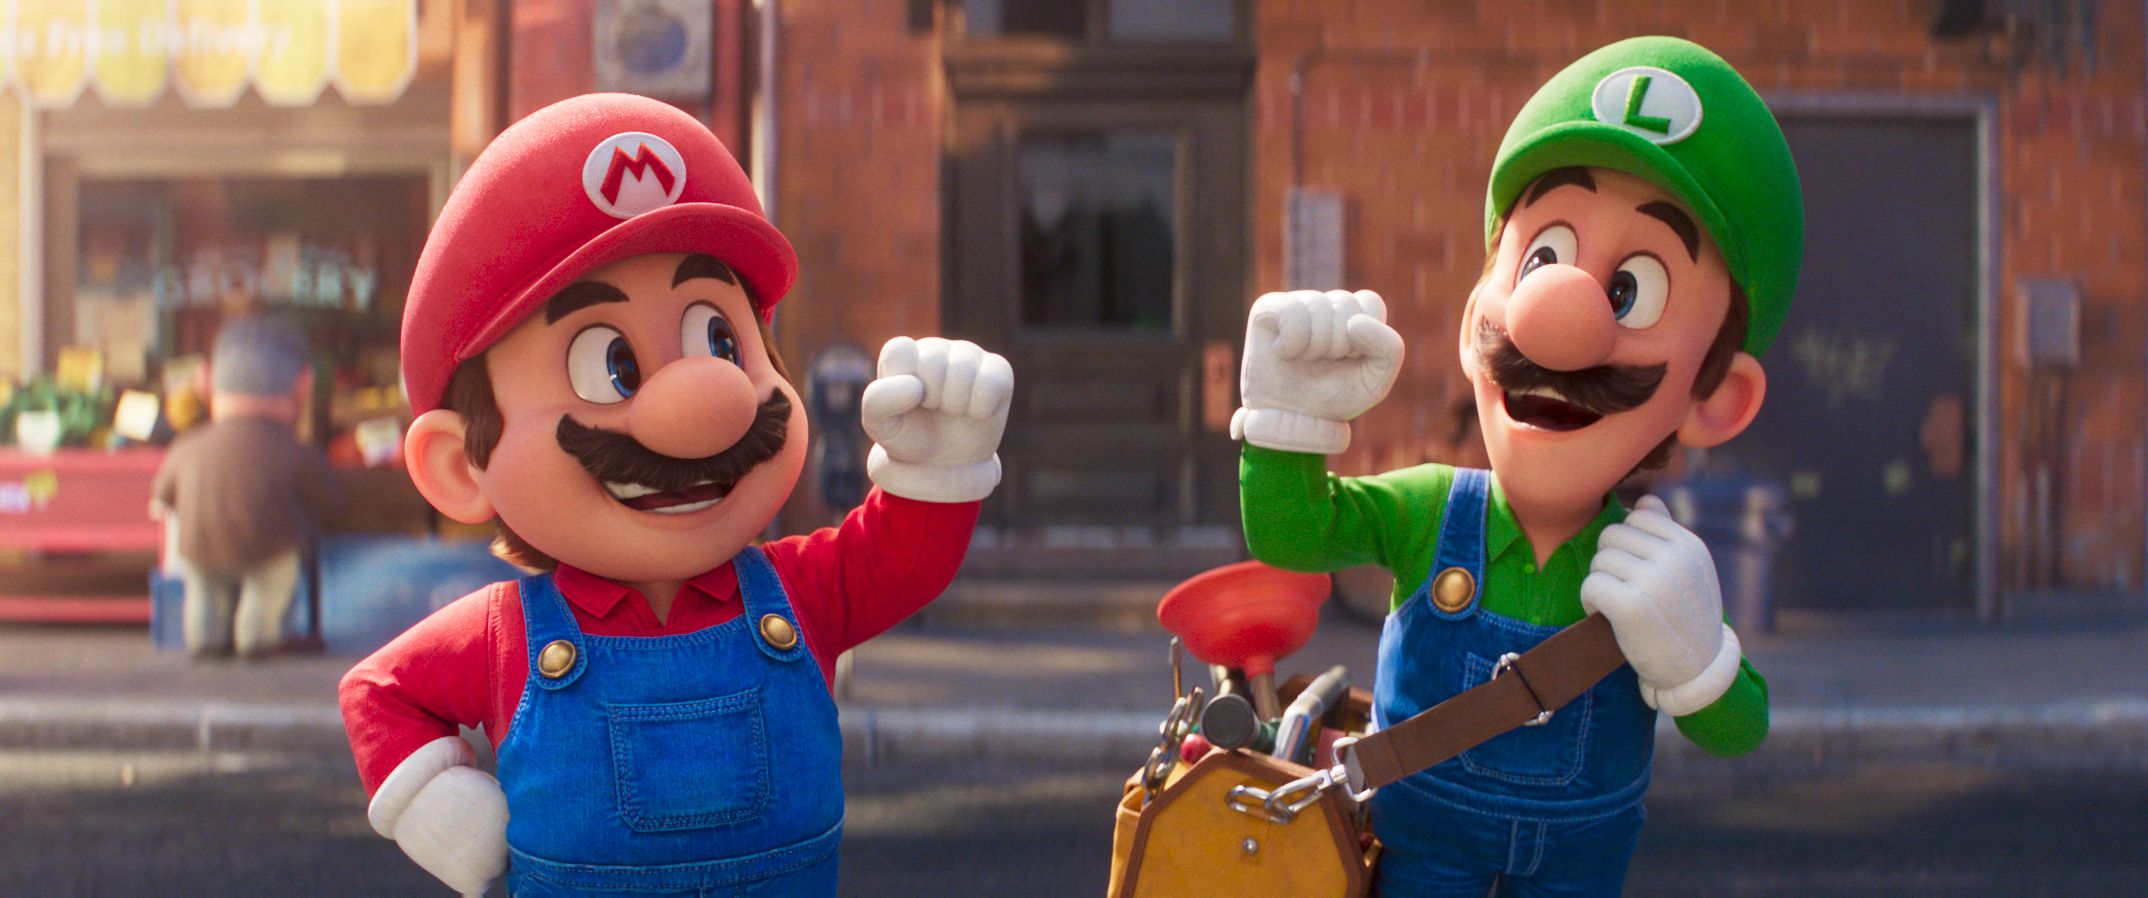 Why Super Mario Odyssey 2 is Likely in Development